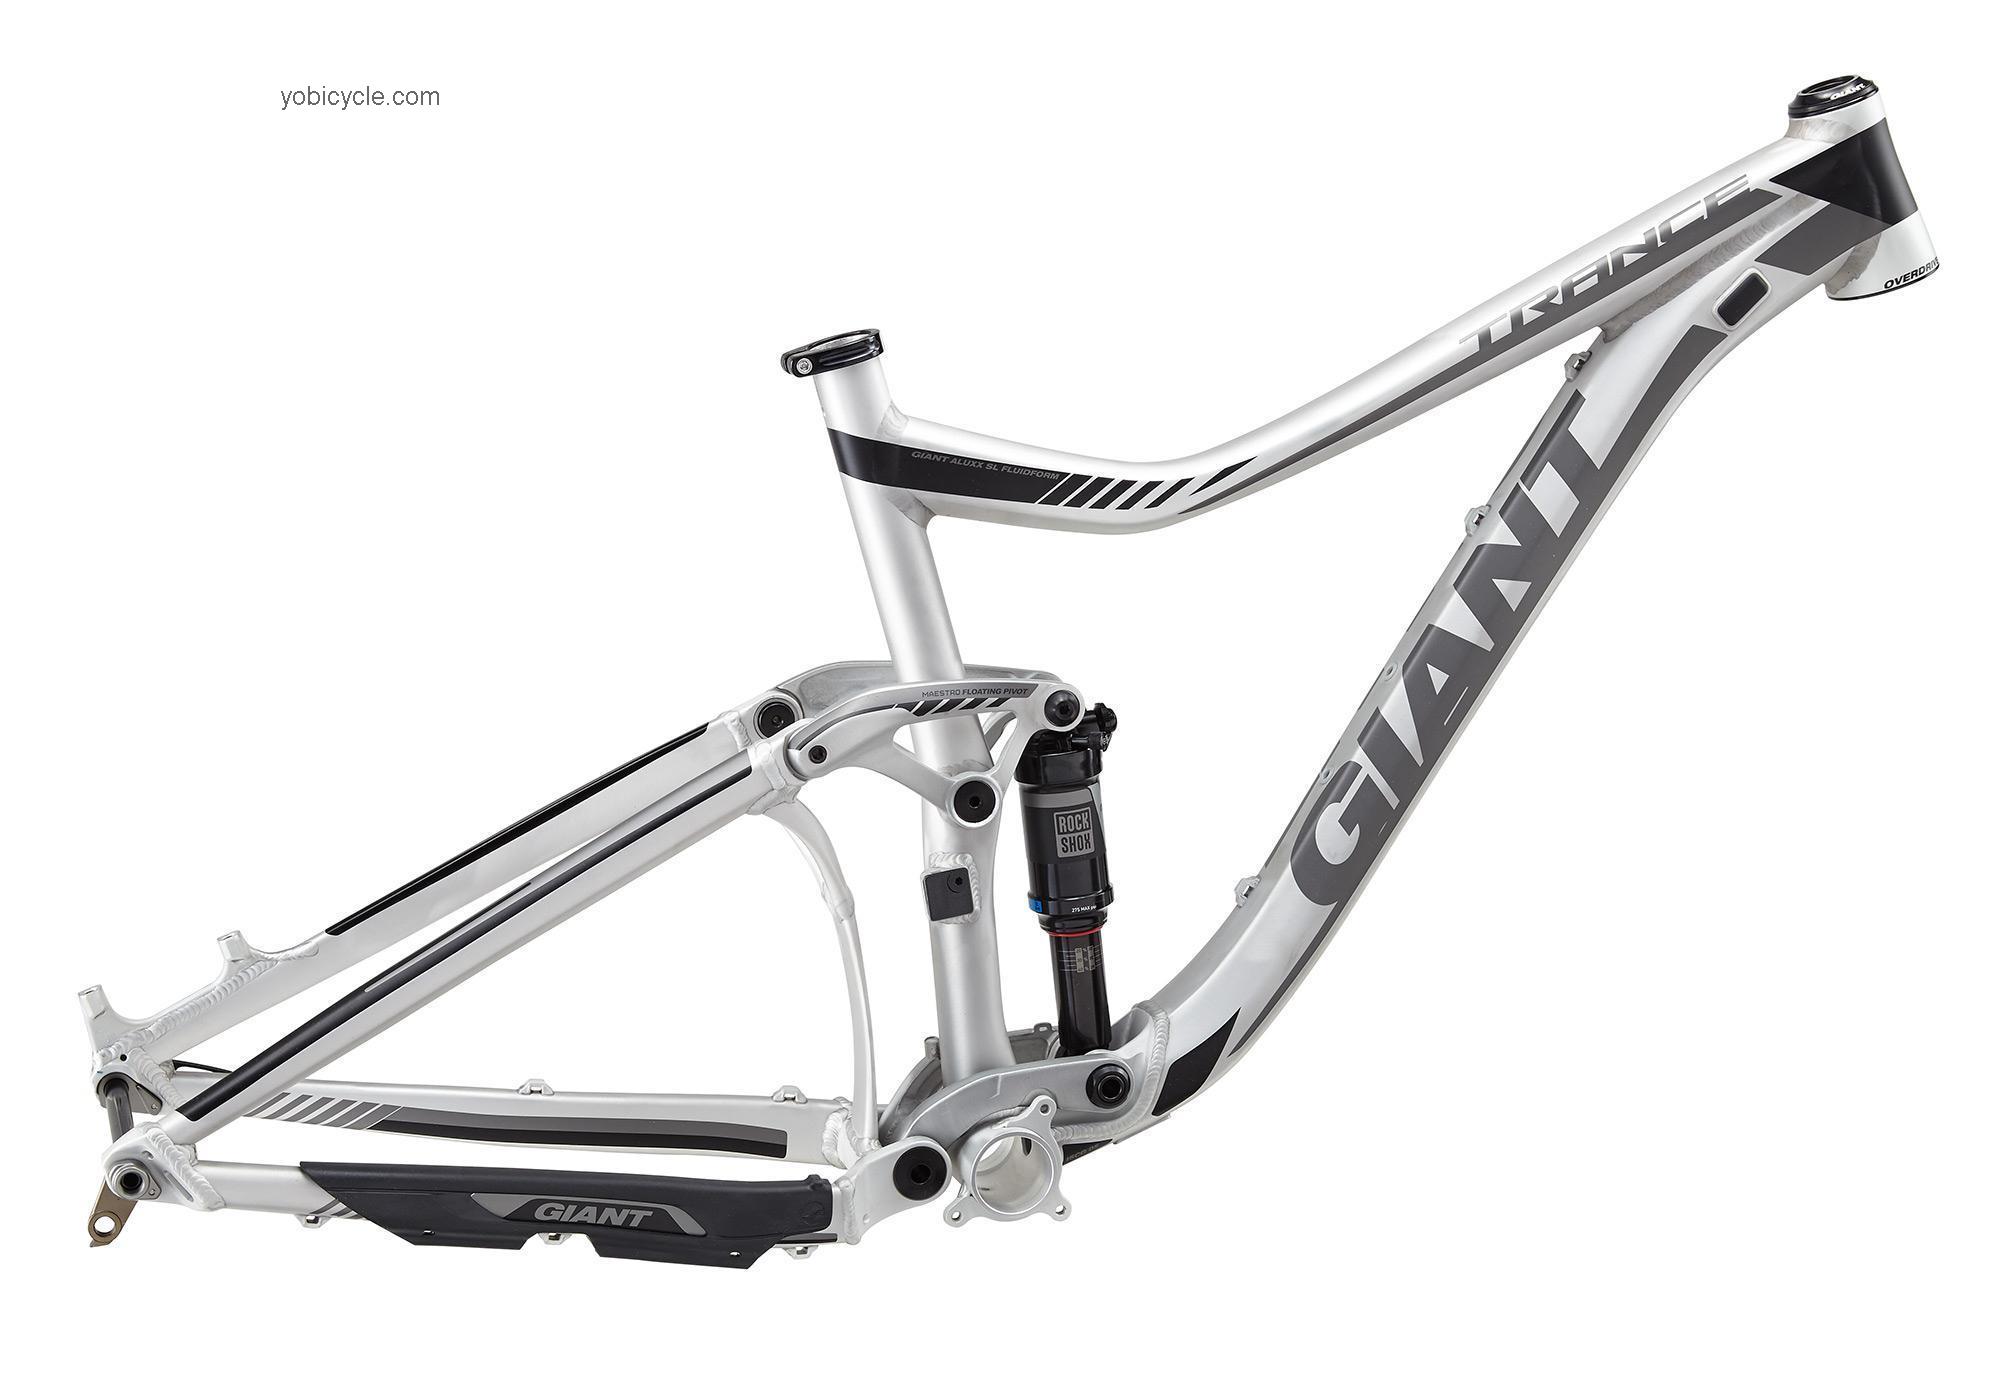 Giant Trance 27.5 Frameset 2015 comparison online with competitors